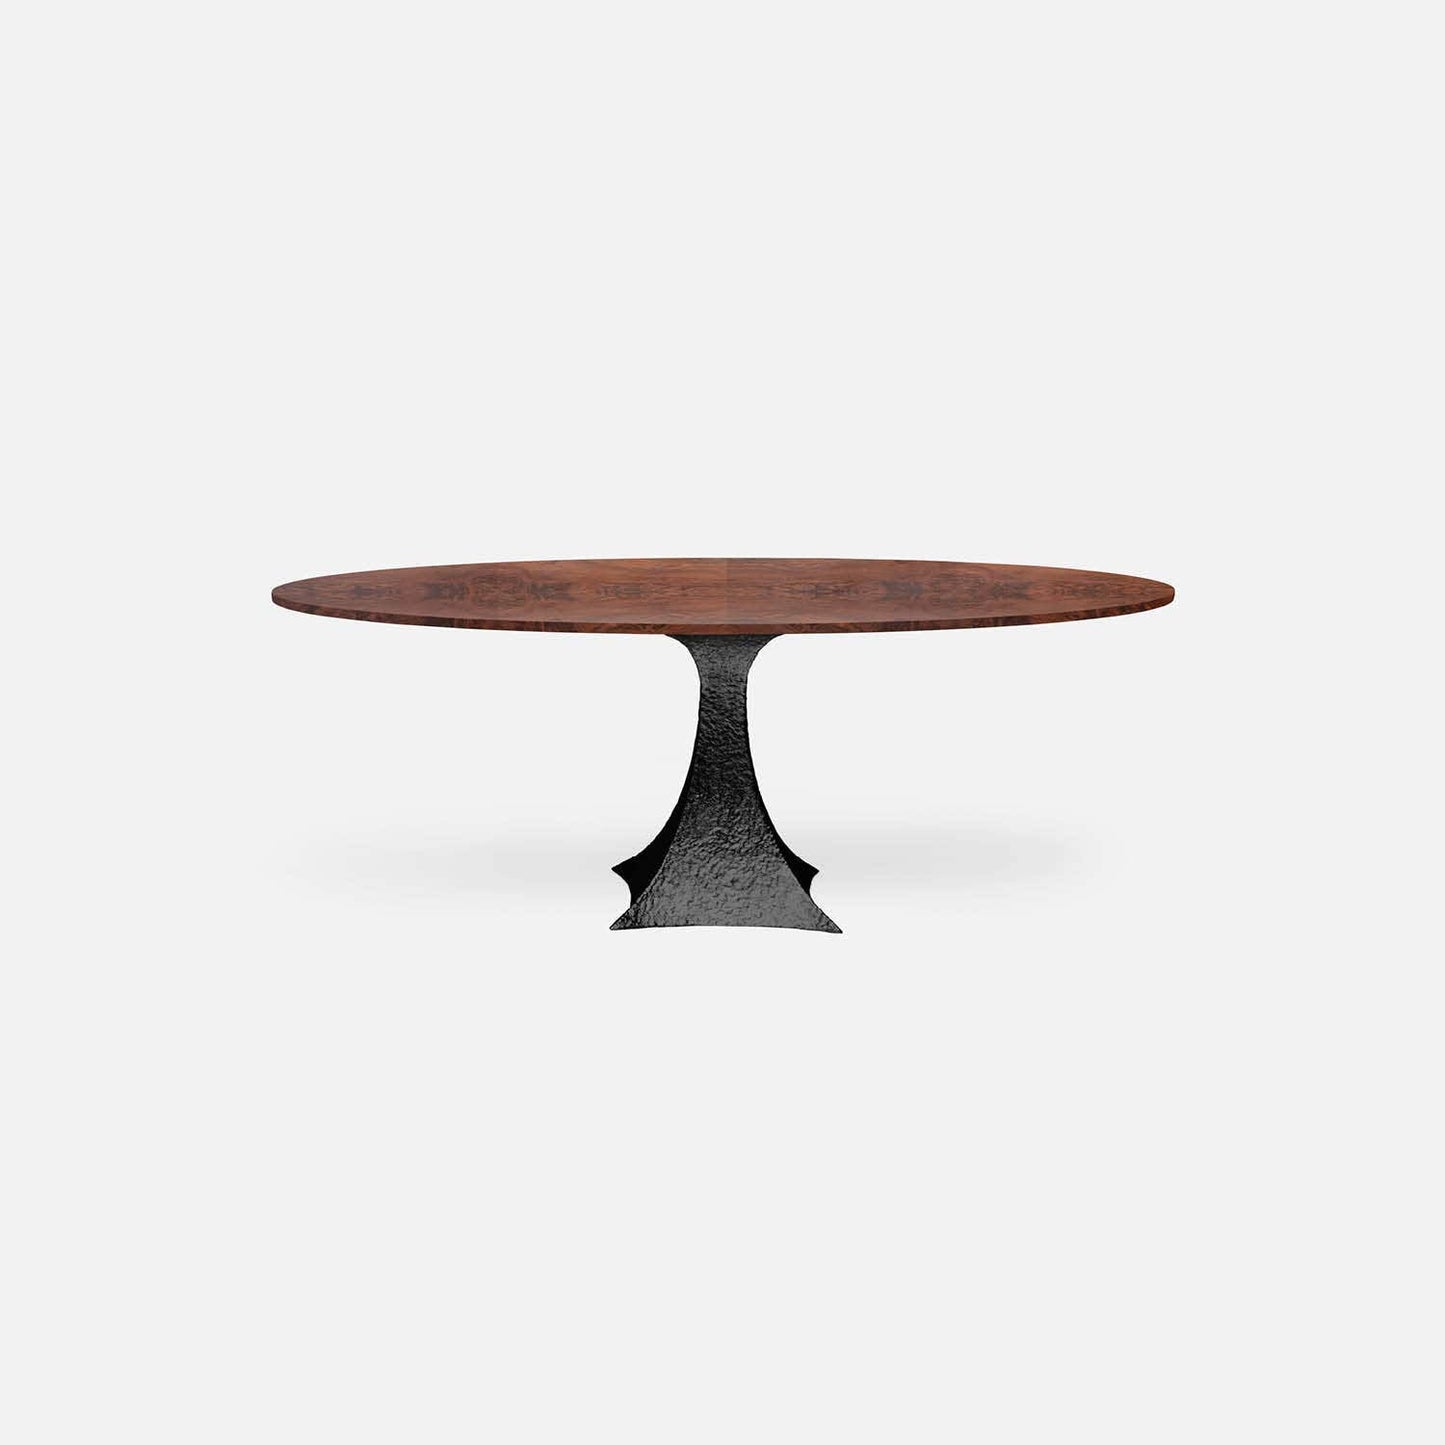 Made Goods Noor 72" x 42" x 30" Single Base Bumpy Black Iron Dinning Table With Oval Walnut Veneer Table Top